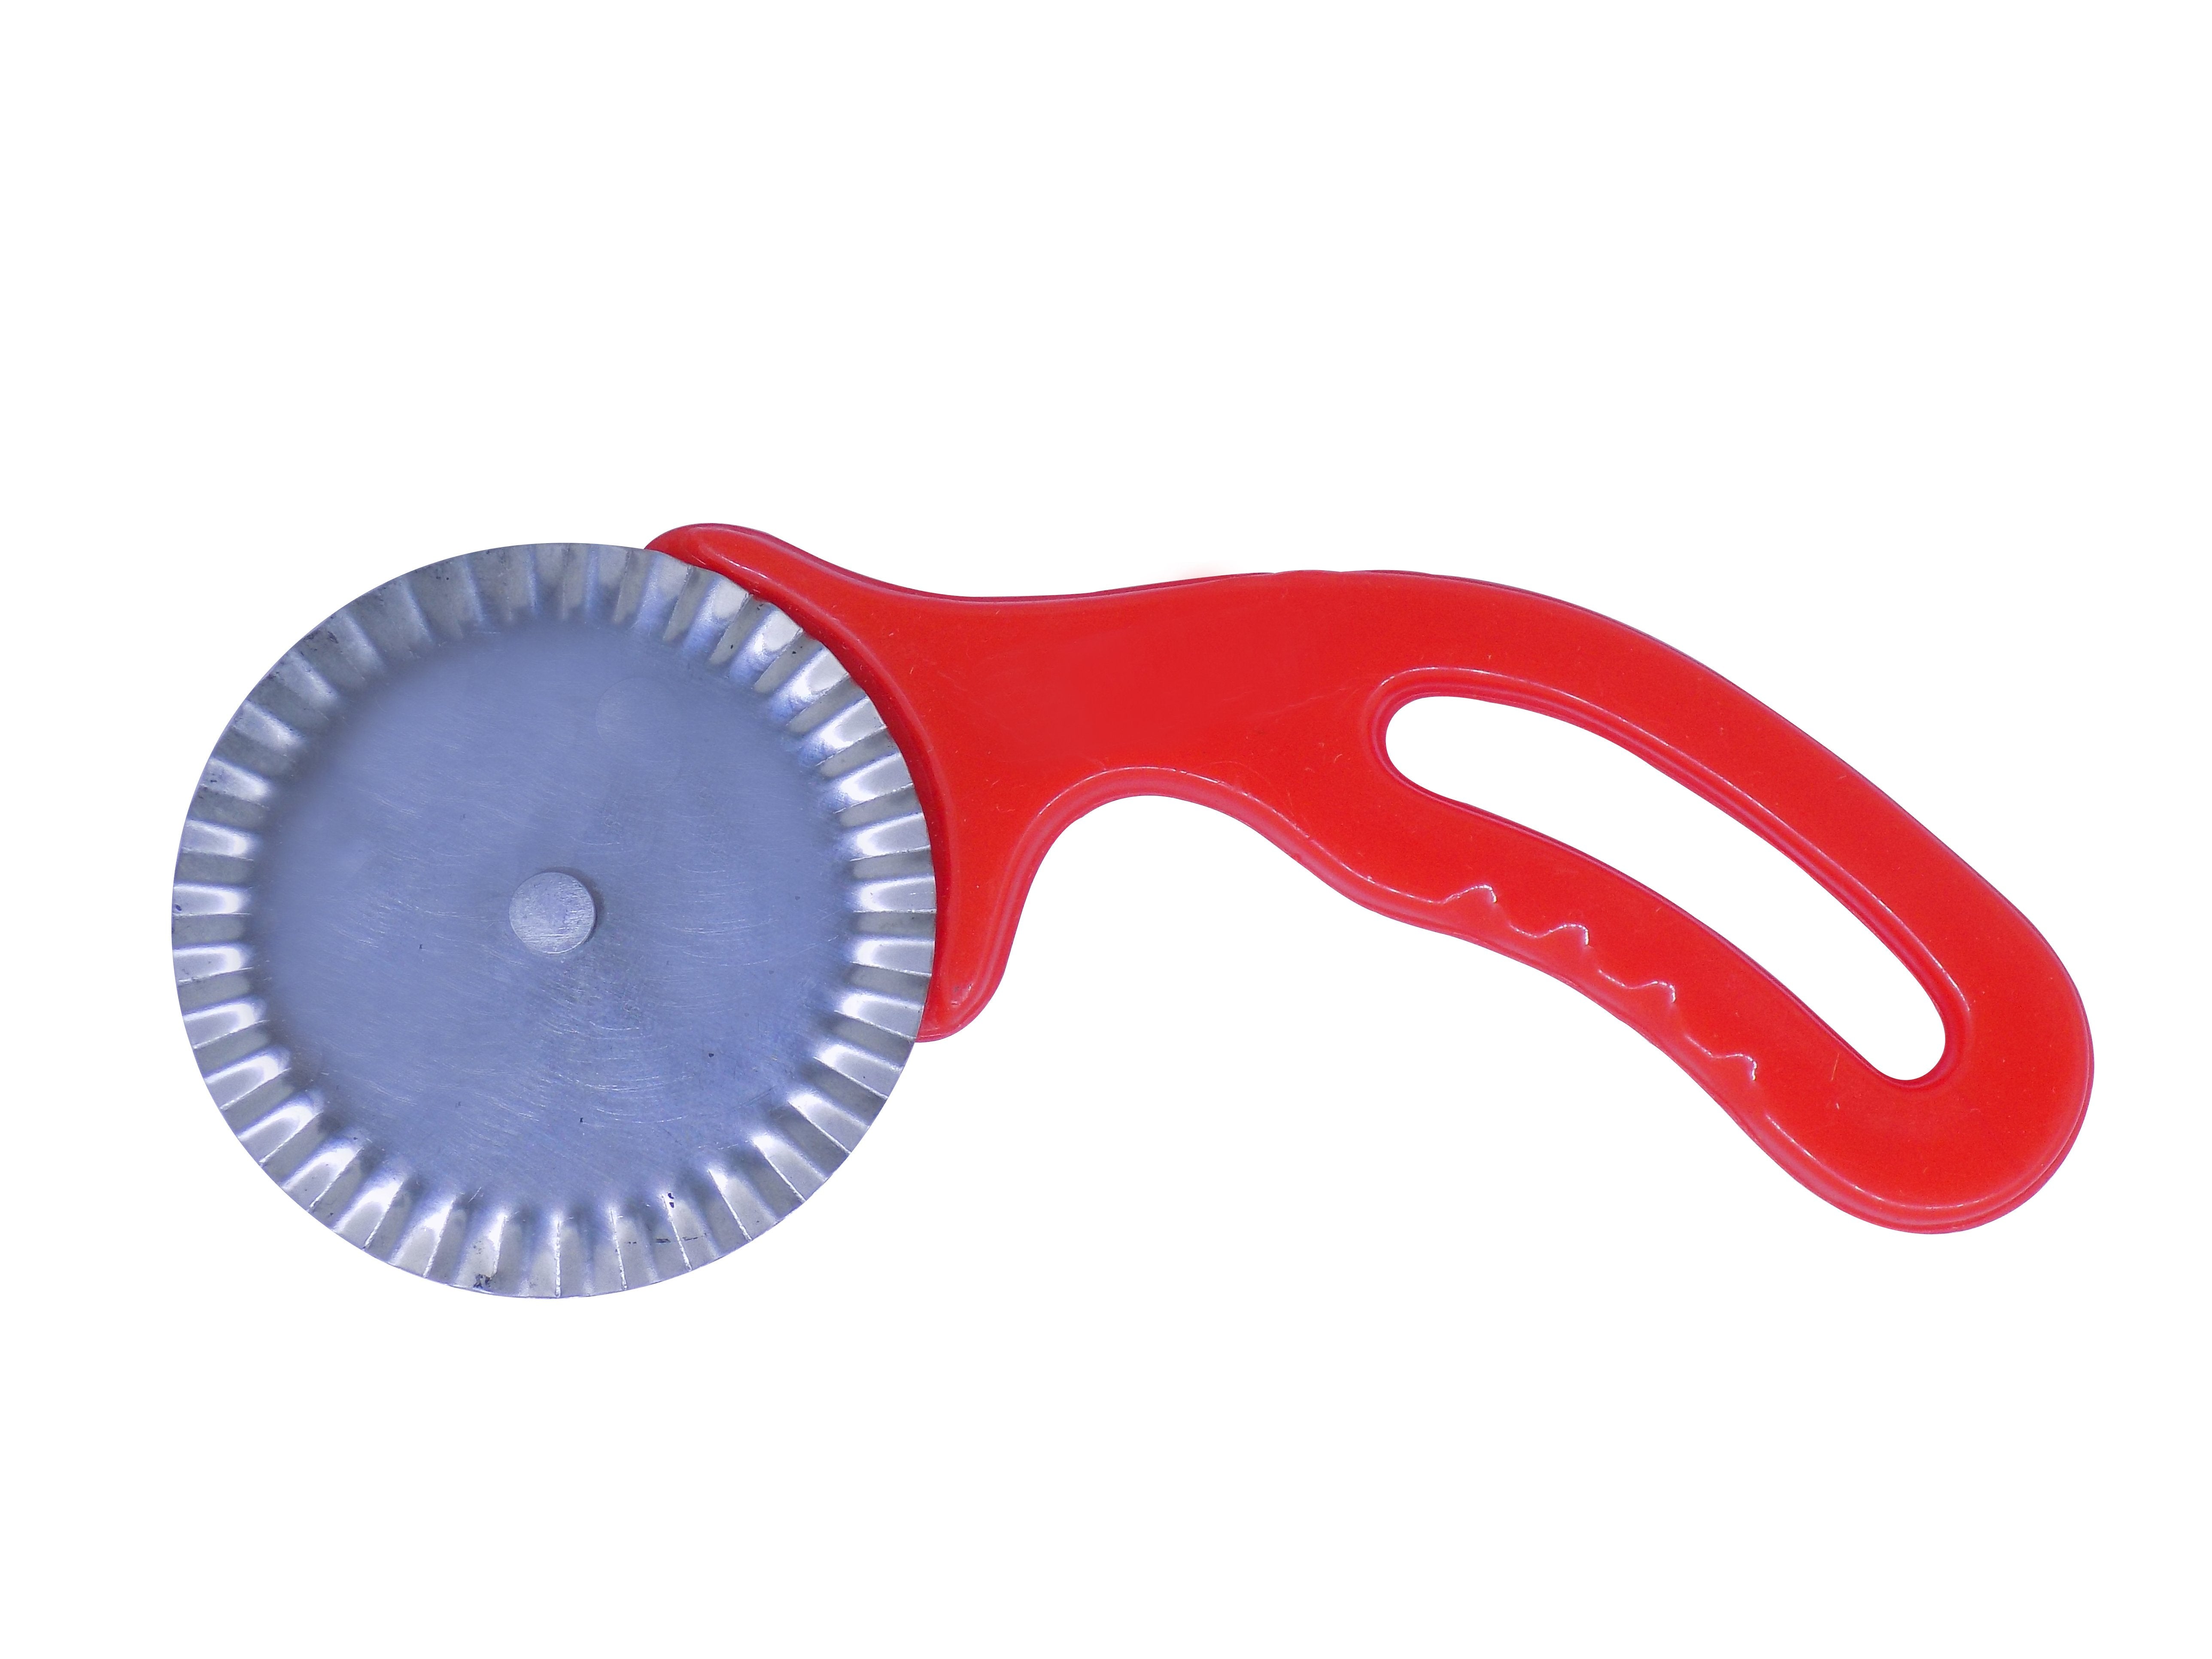 0725 Curly Pizza Cutter/Pastry Cutter/Sandwiches Cutter - Ambitionofcreativity.in - Kitchen - Ambitionofcreativity.in